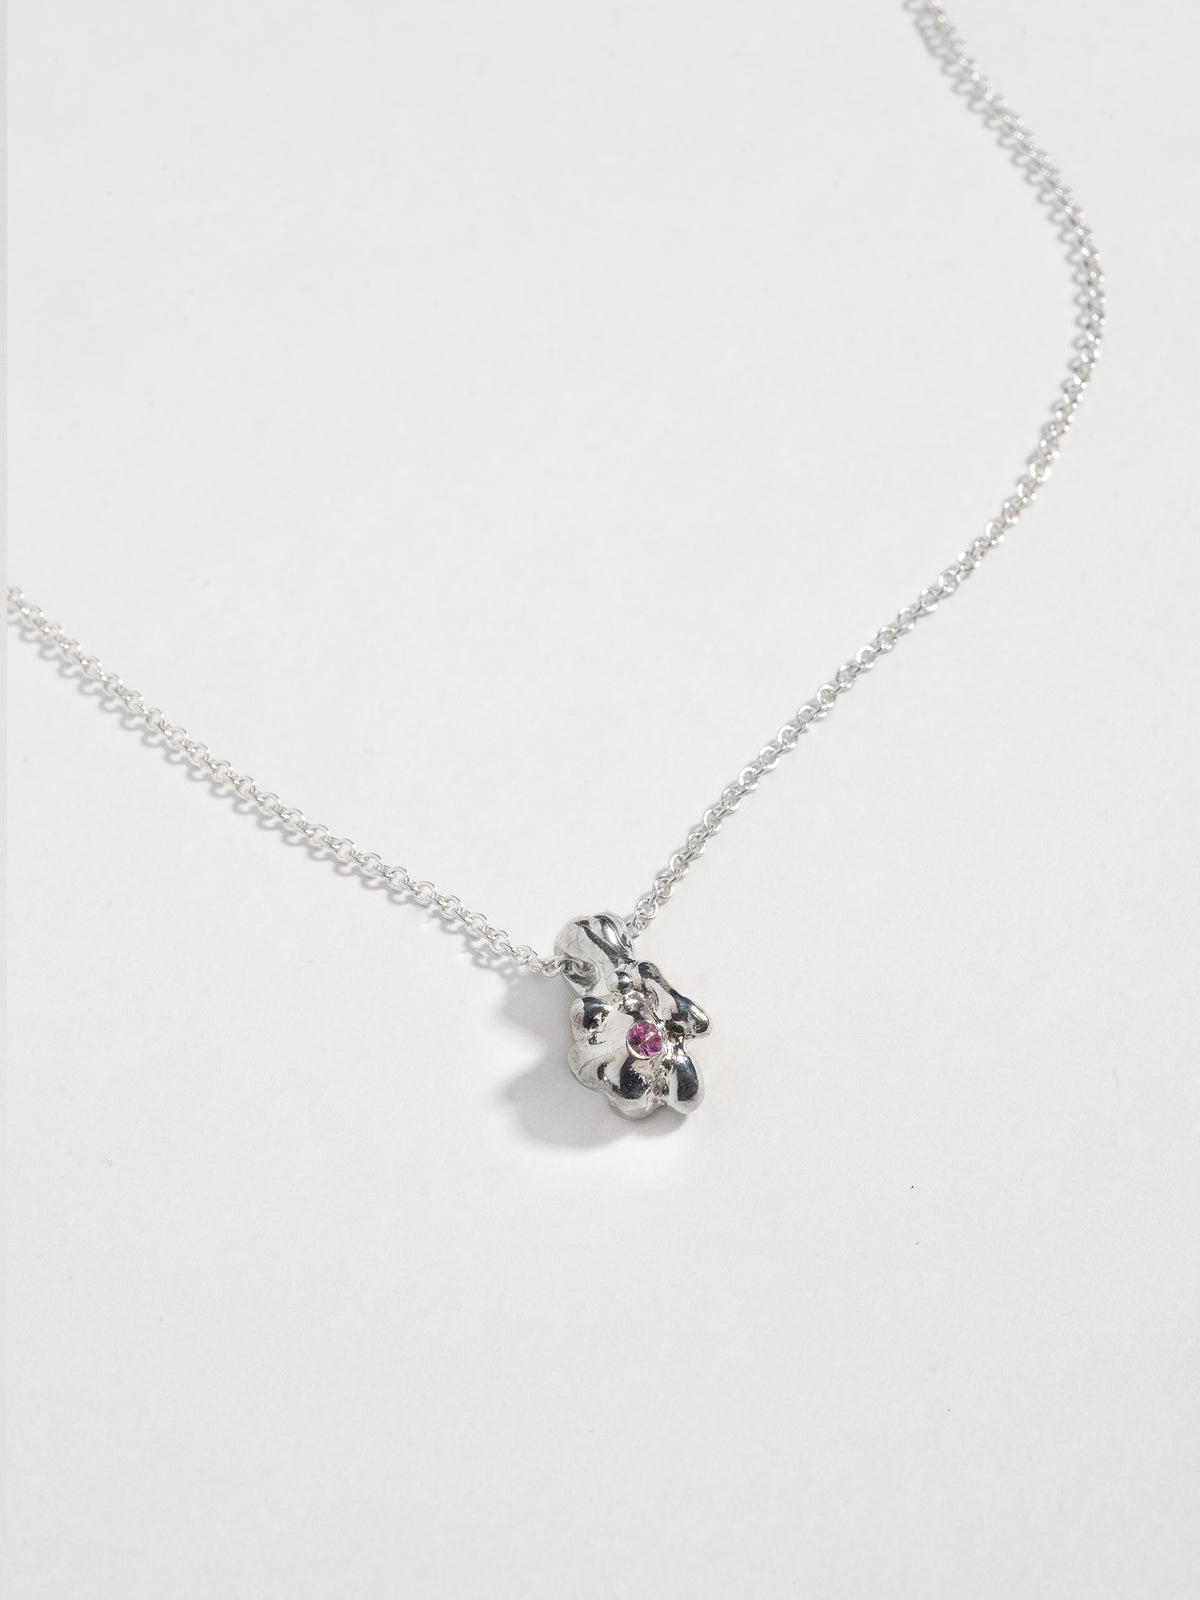 Close up image of Sterling silver GOBBO Necklace pendant with pink sapphire